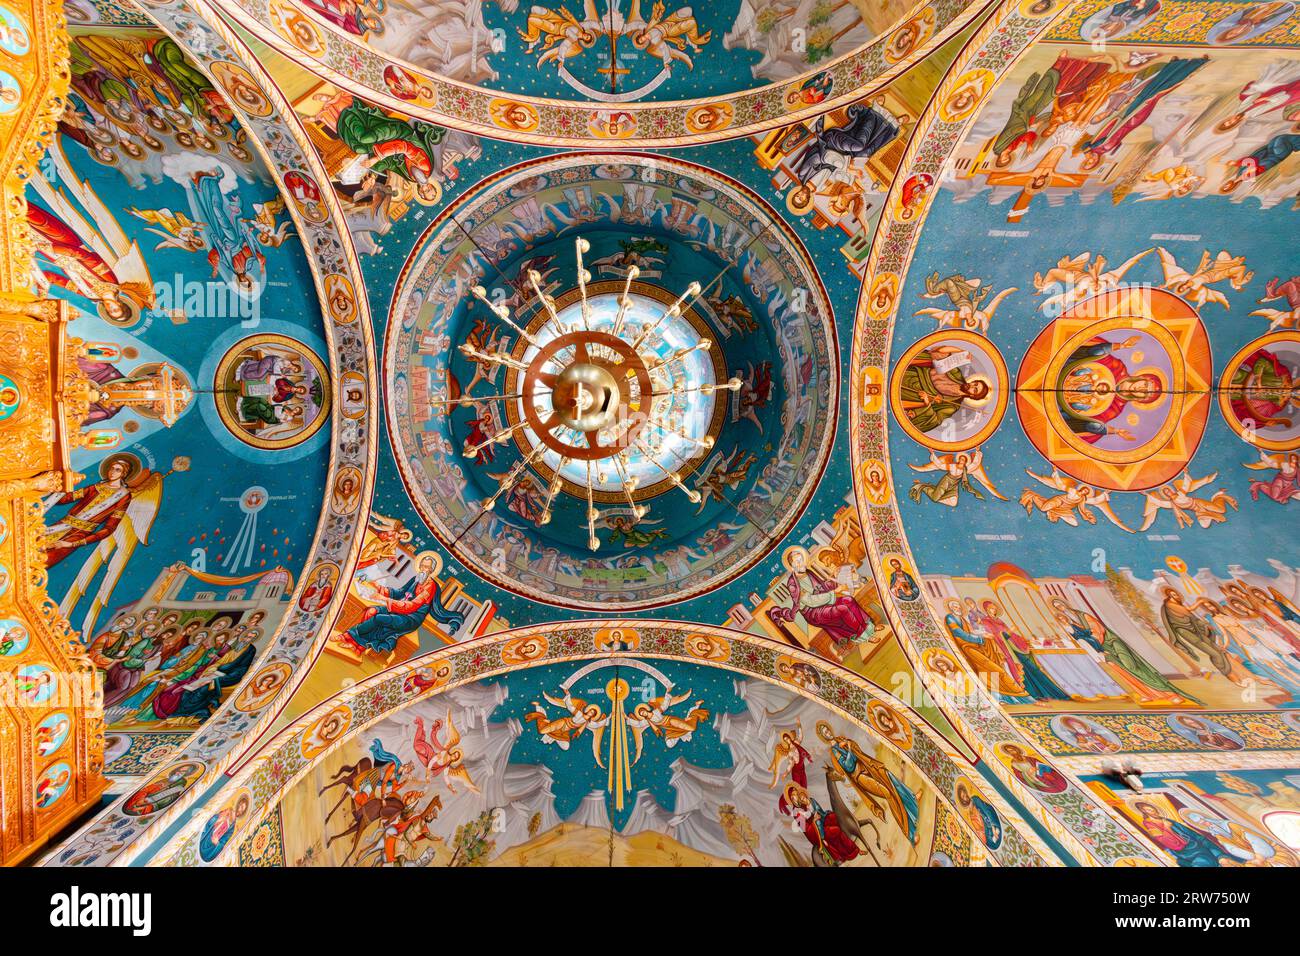 Orthodox church - inside view of walls and paintings Stock Photo